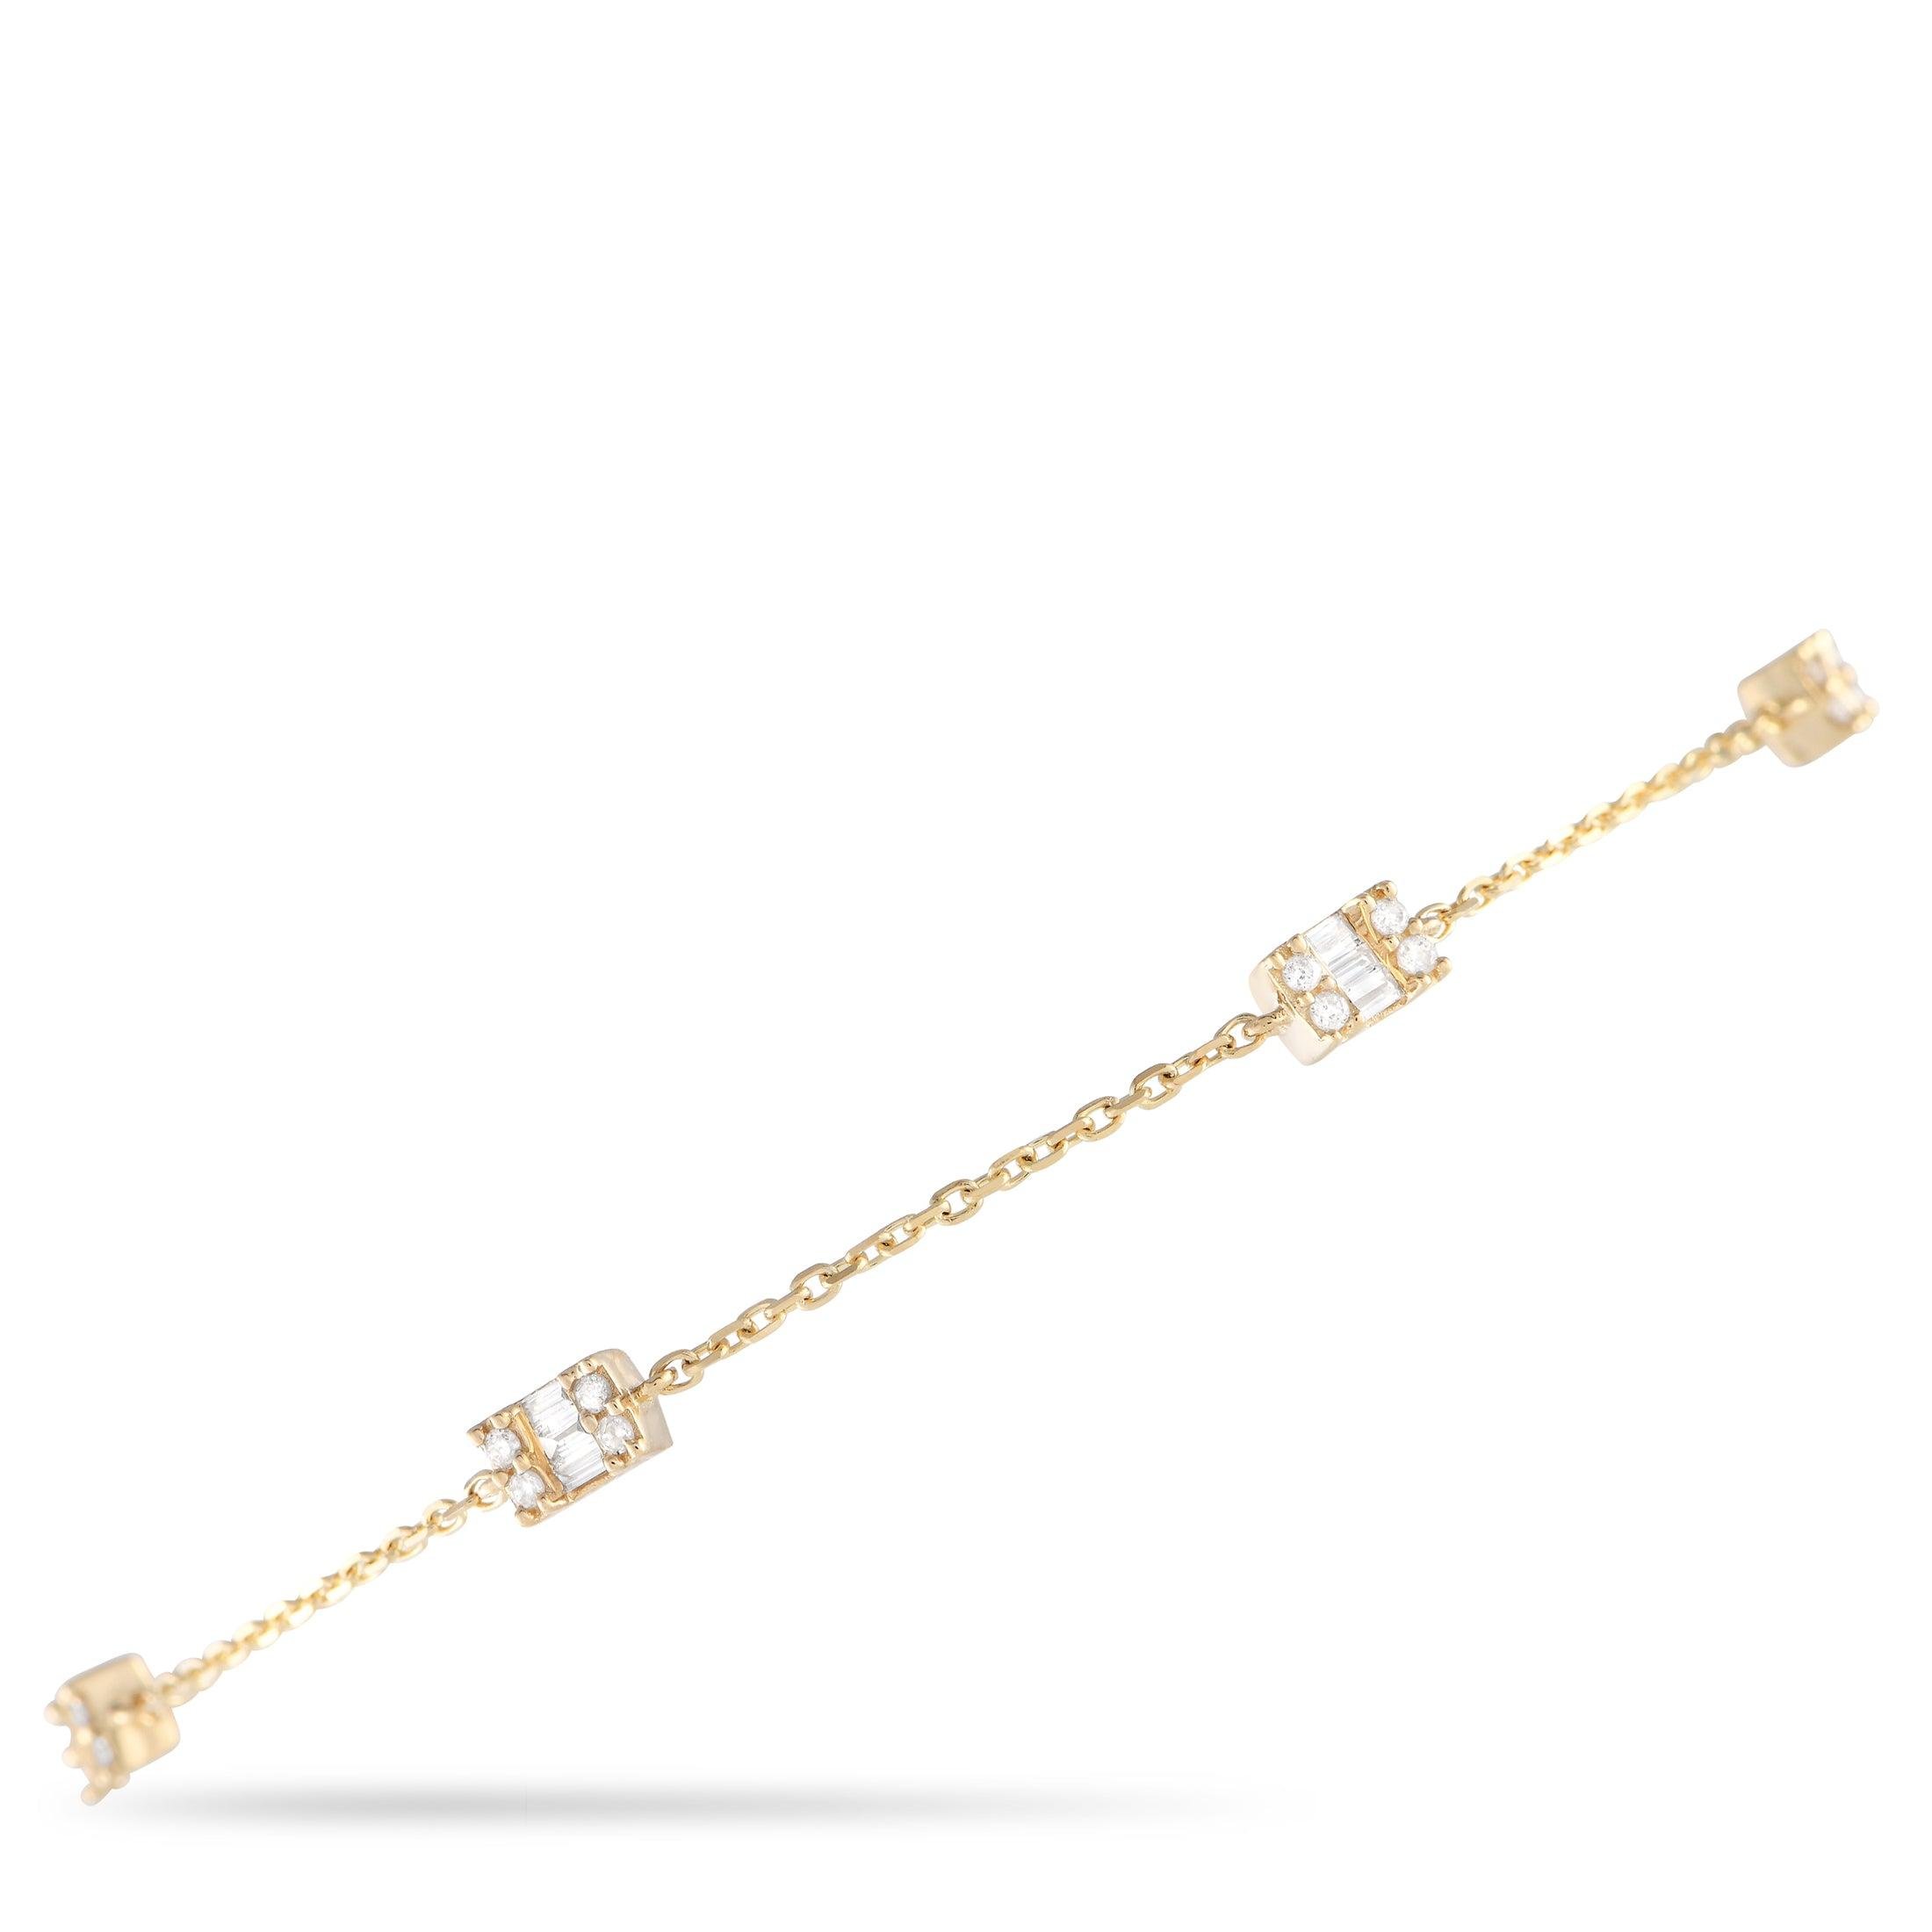 LB Exclusive 14K Yellow Gold 0.25ct Diamond Station Bracelet BR09824 by NON BRANDED